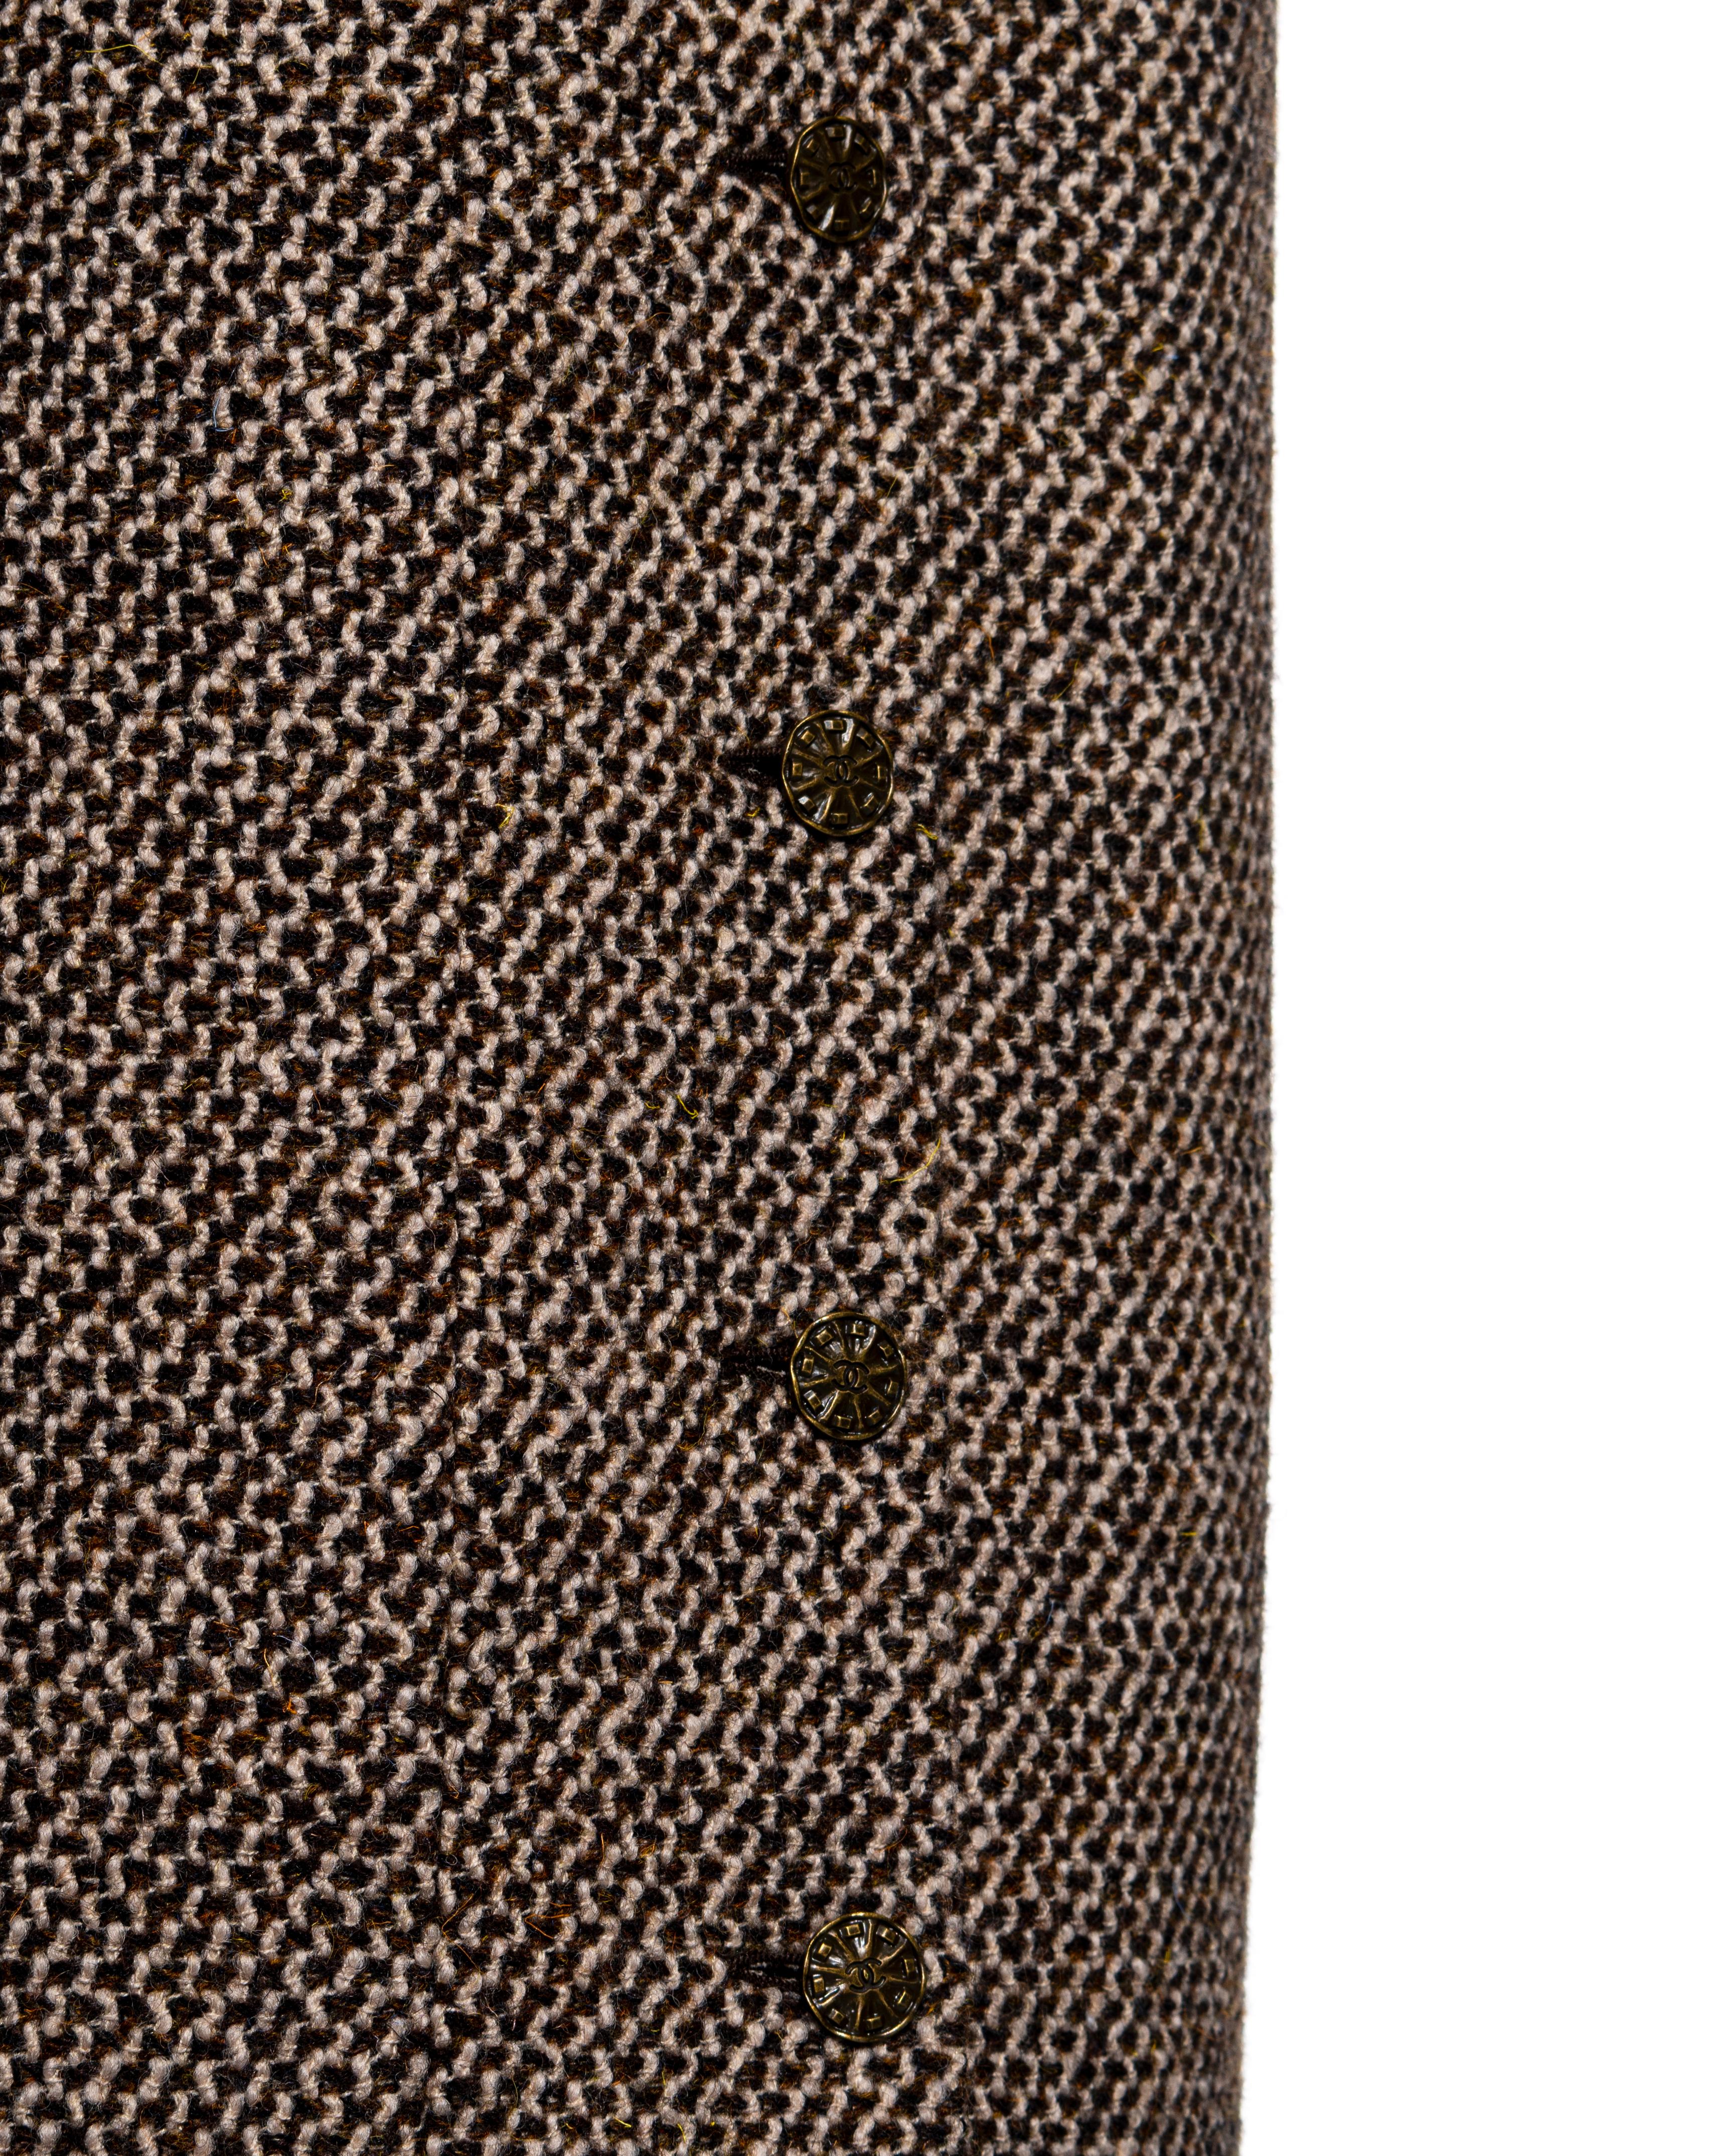 Chanel by Karl Lagerfeld brown tweed pleated jacket maxi skirt suit, fw 1998 For Sale 4